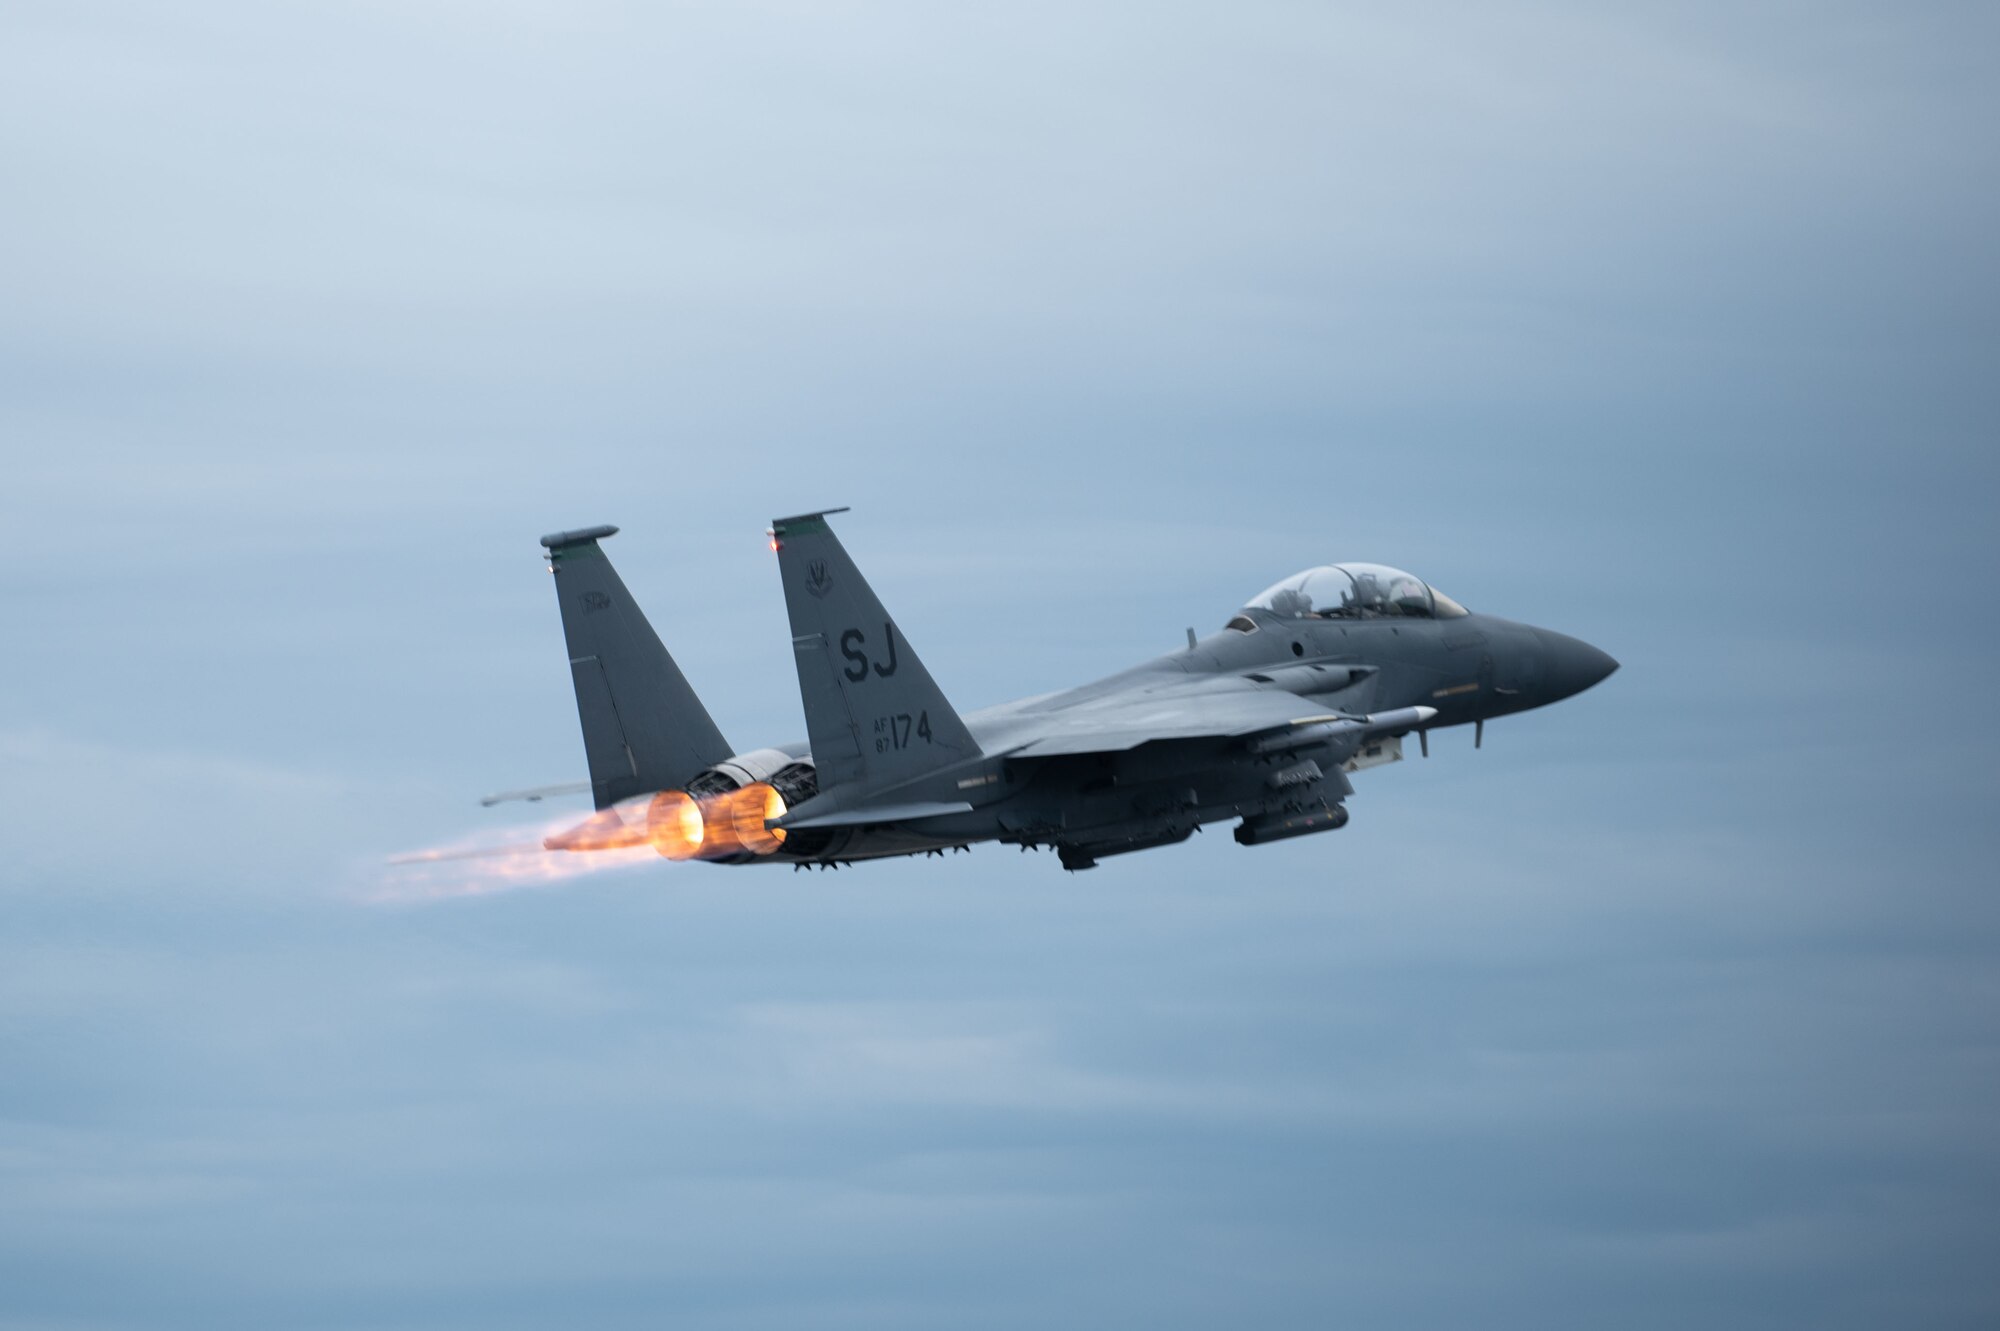 An F-15E Strike Eagle takes off from Marine Corps Air Station Cherry Point, North Carolina, as part of the Agile Cub 3 exercise, Dec. 14, 2022. During this exercise, Airmen conducted integrated combat turns which uses military personnel and equipment to rapidly refuel and rearm aircraft. (U.S. Air Force photo by Airman 1st Class Rebecca Sirimarco-Lang)